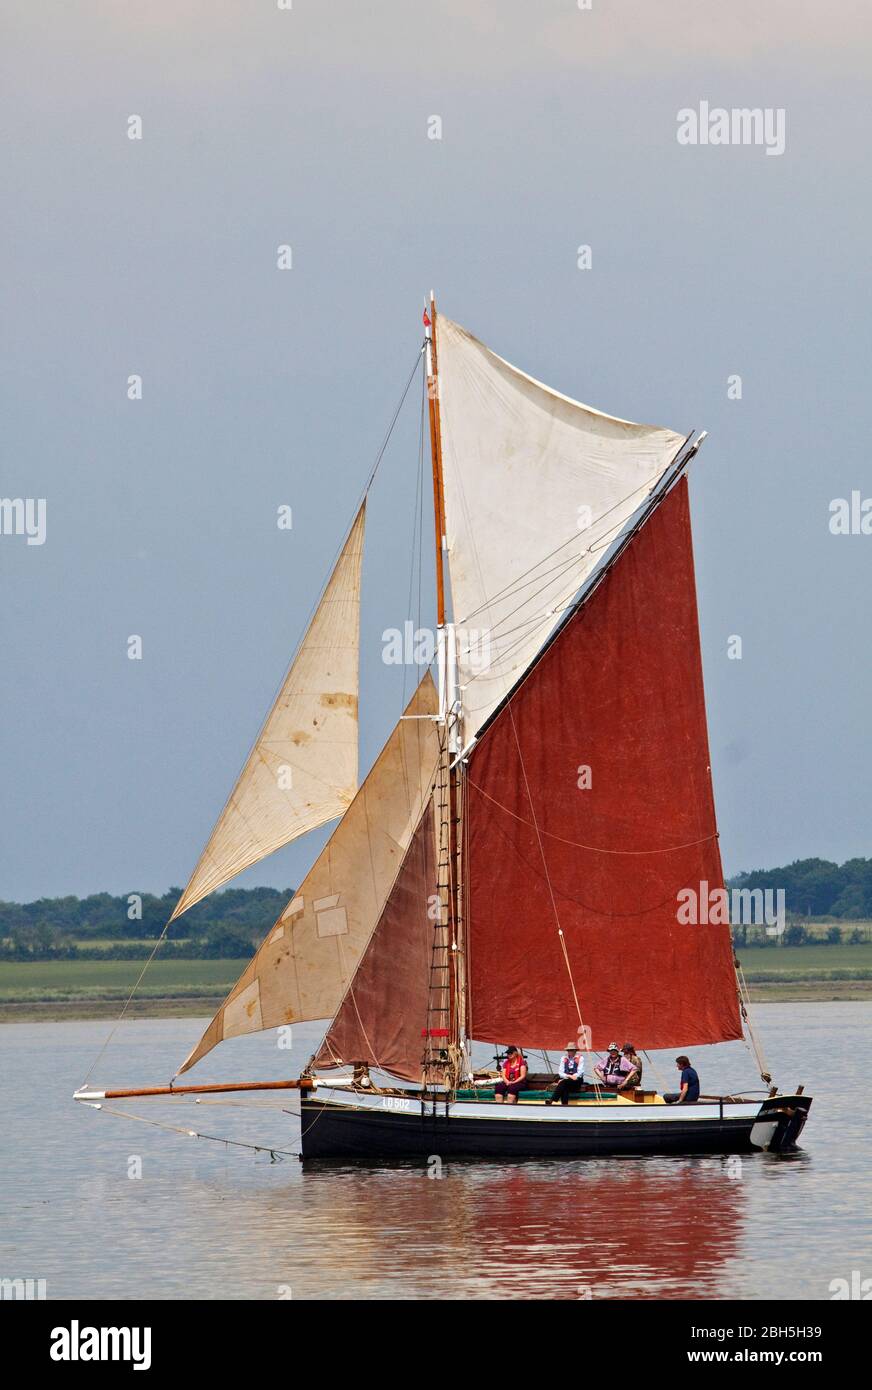 The Leigh bawley Mary Amelia, LO502, in full sail, Stock Photo